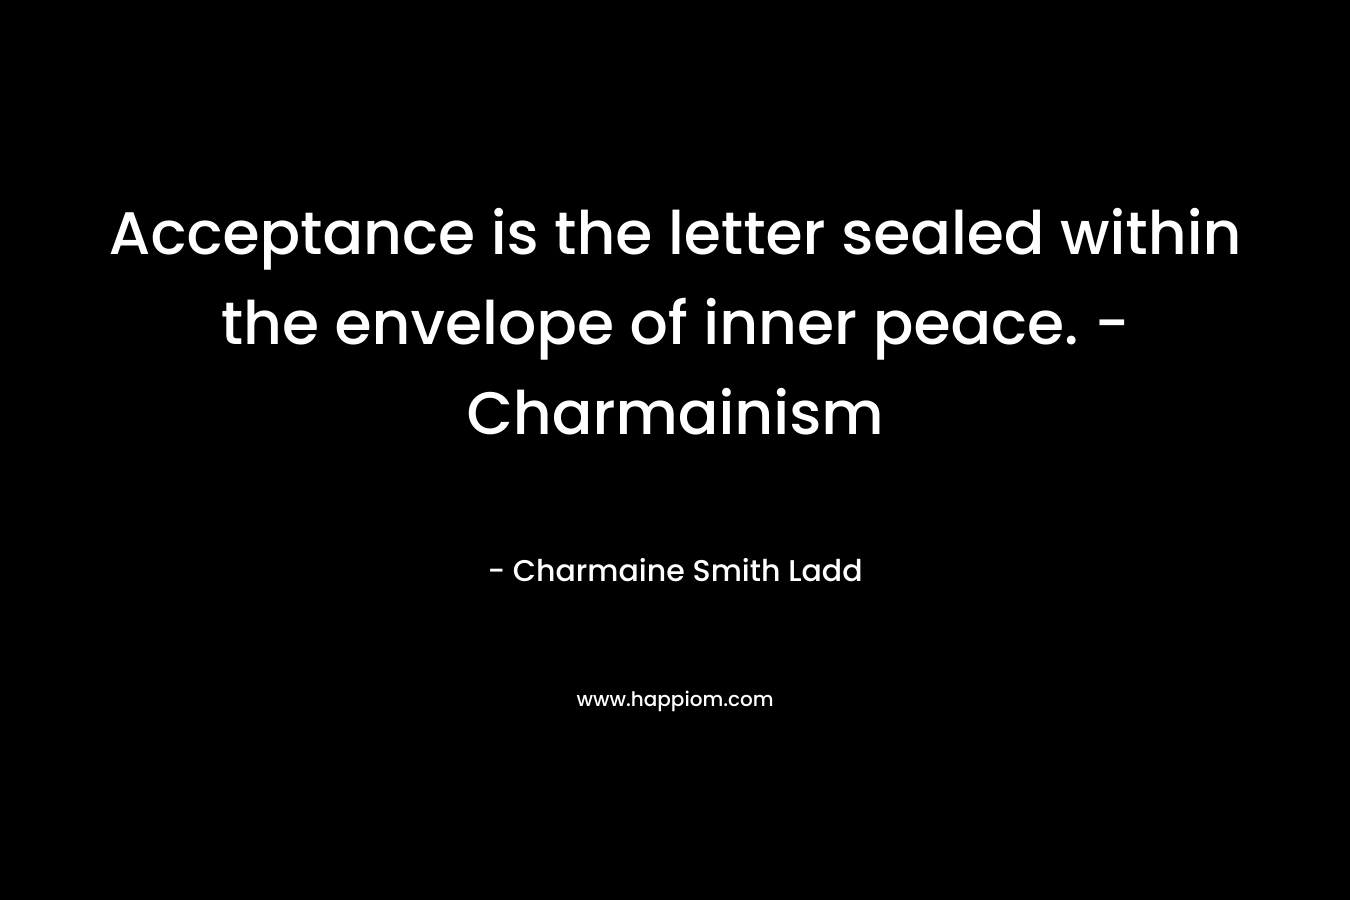 Acceptance is the letter sealed within the envelope of inner peace. - Charmainism